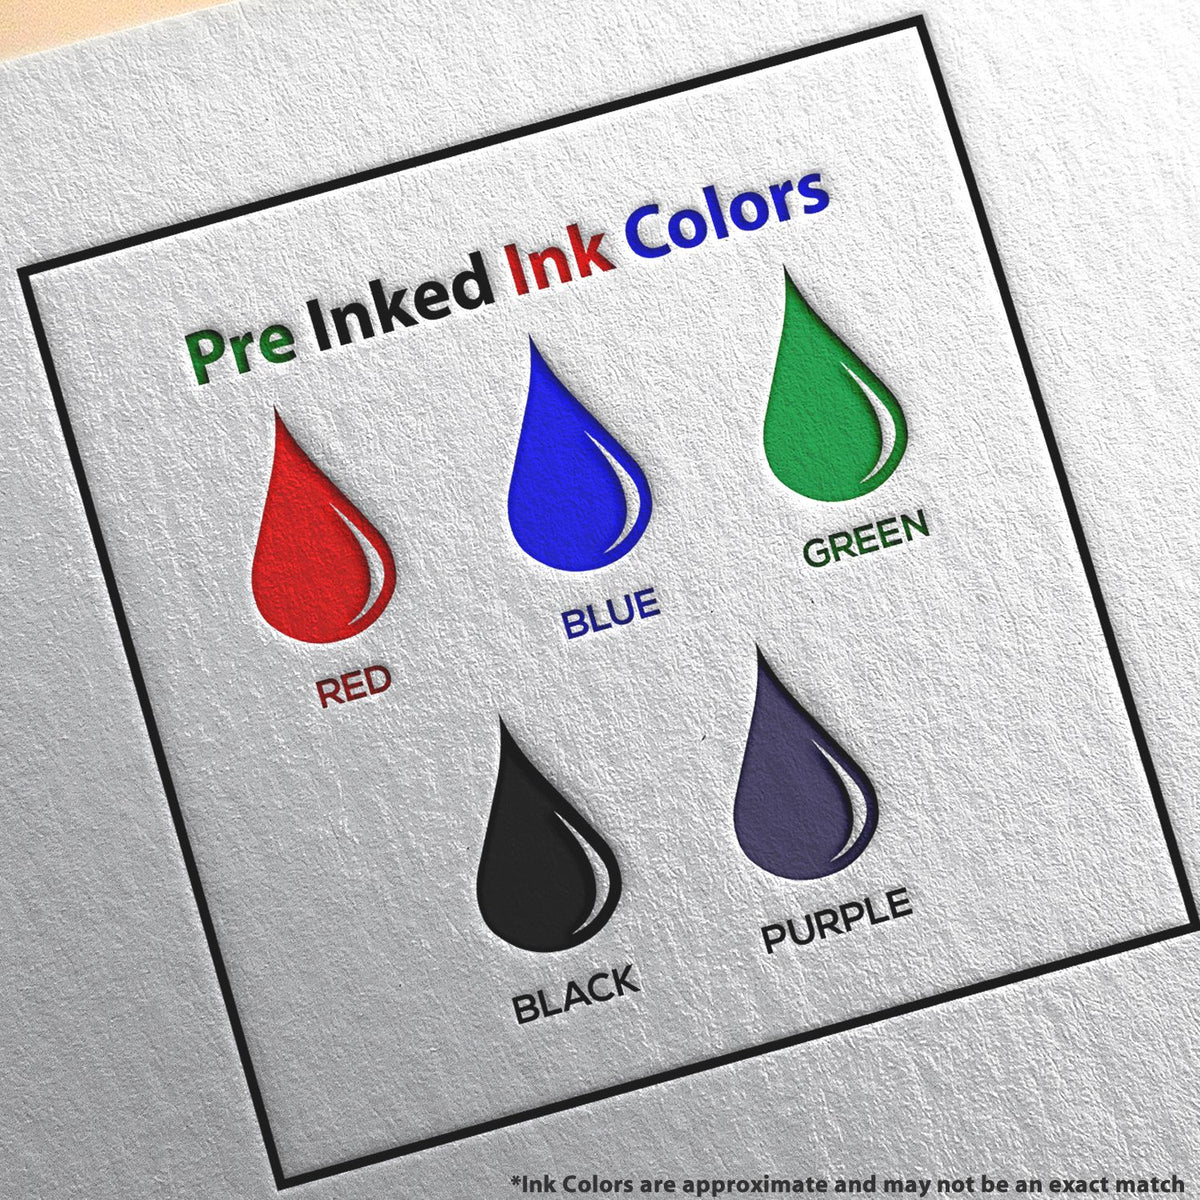 A picture showing the different ink colors or hues available for the PSI South Carolina Notary Stamp product.